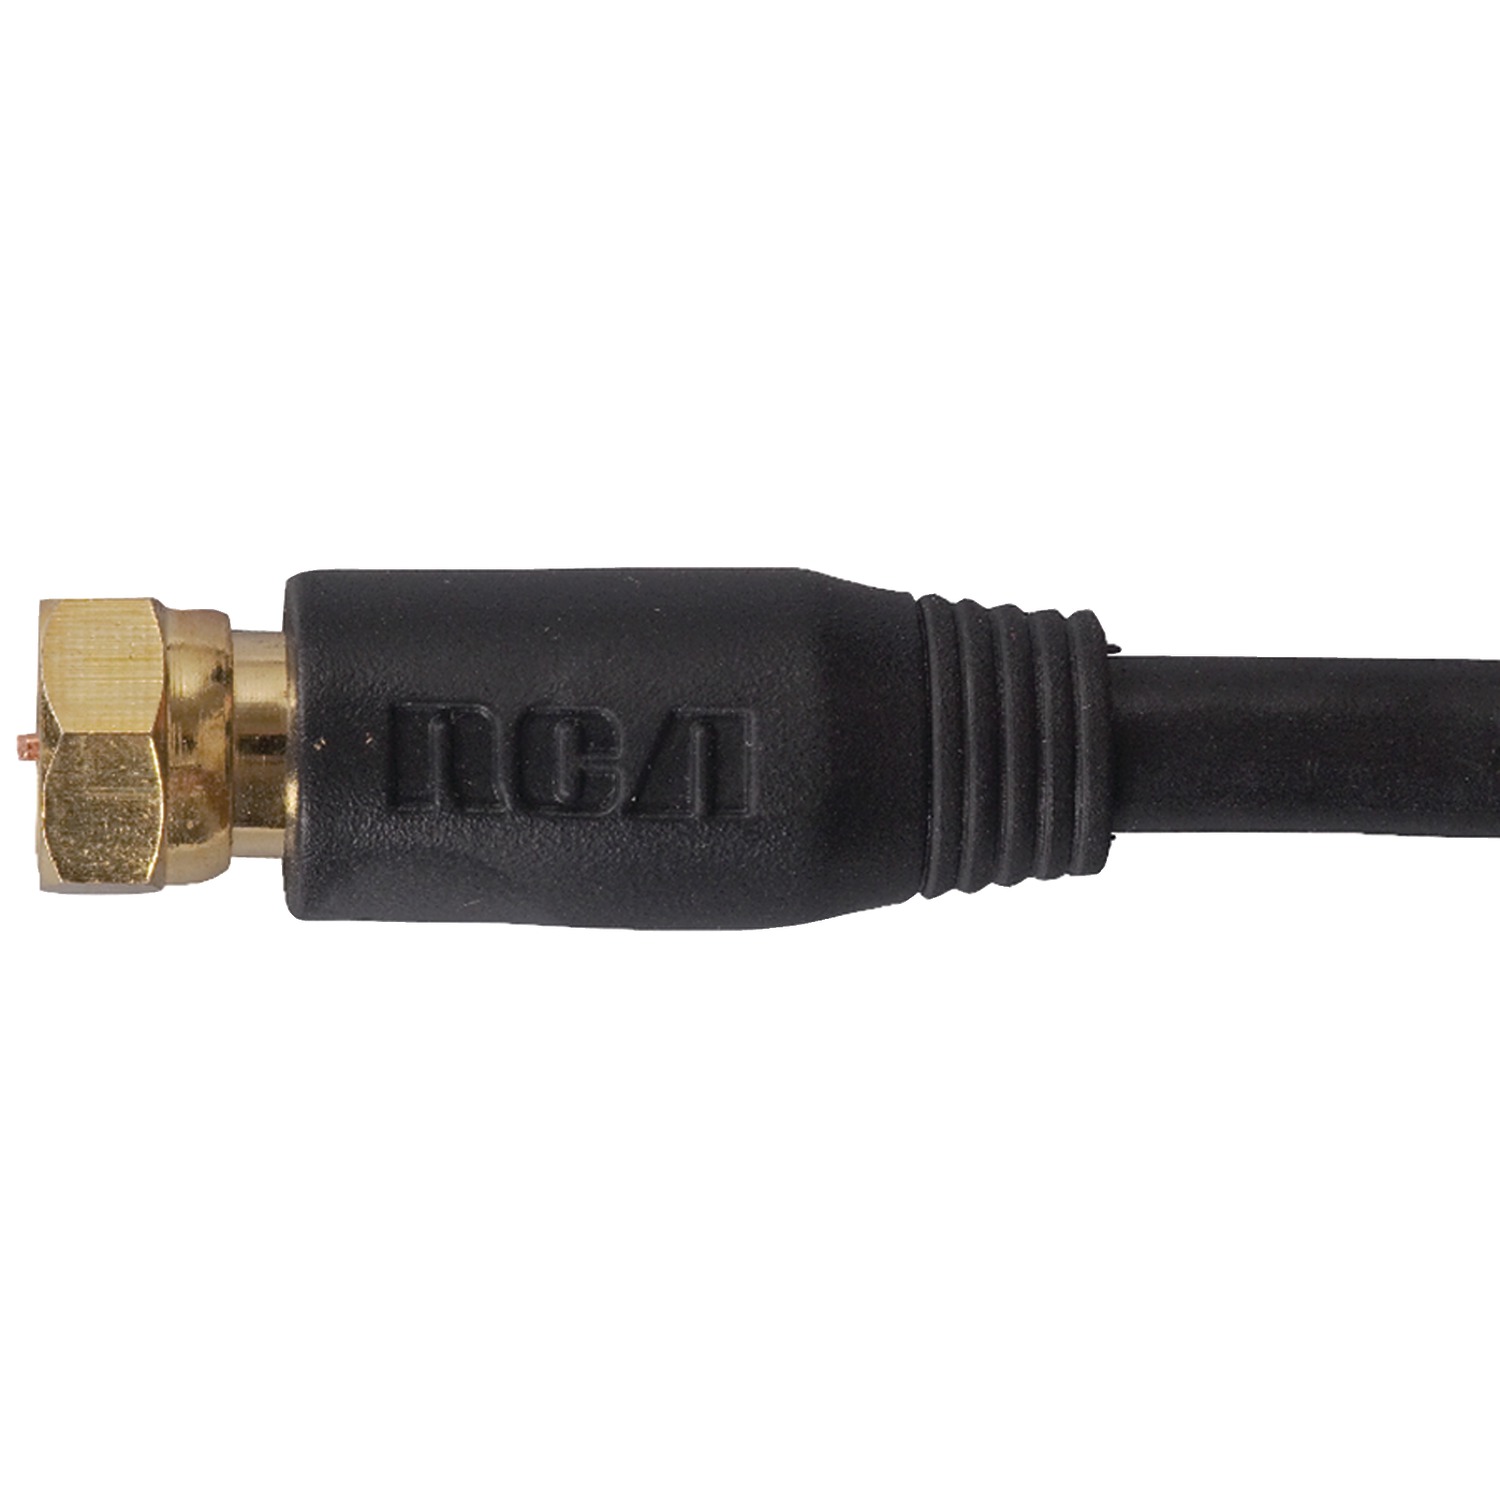 Rca Vhb655r Rg6 Coaxial Cable (50ft; Black) - image 1 of 3